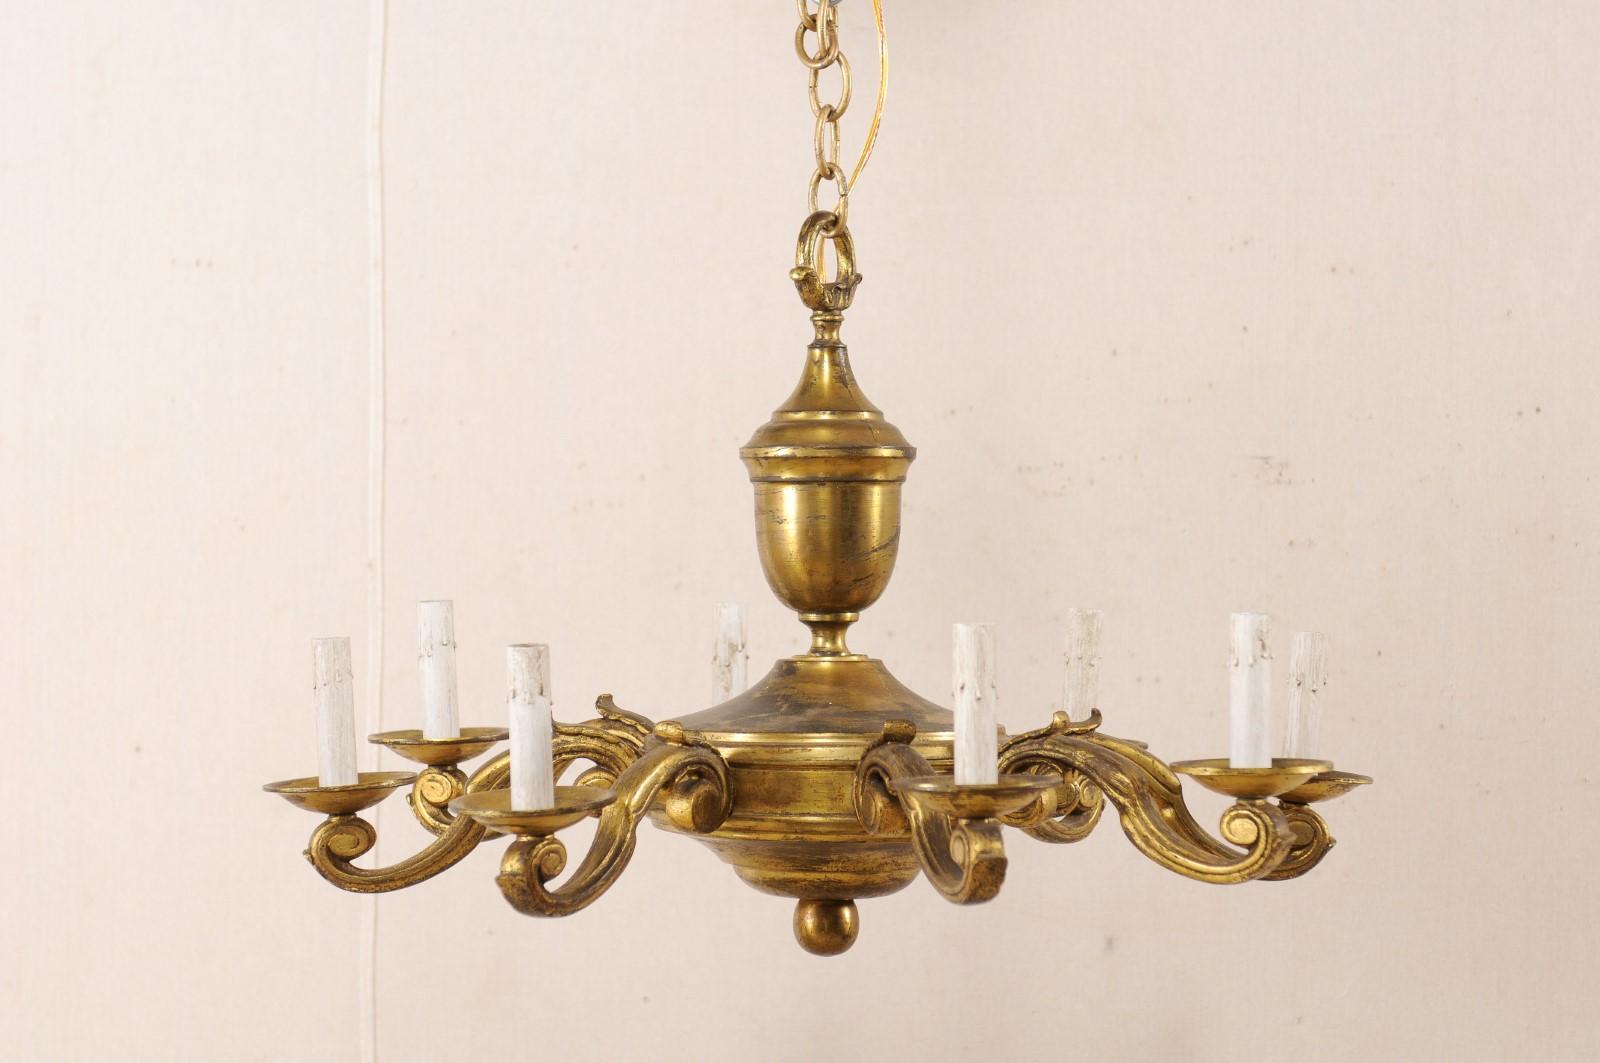 A French gold toned metal eight-light chandelier from the mid-20th century. This vintage chandelier from France features an overall round-shape, with curvy central column, whose more bulbous section supports the light arms. Eight s-style arms extend